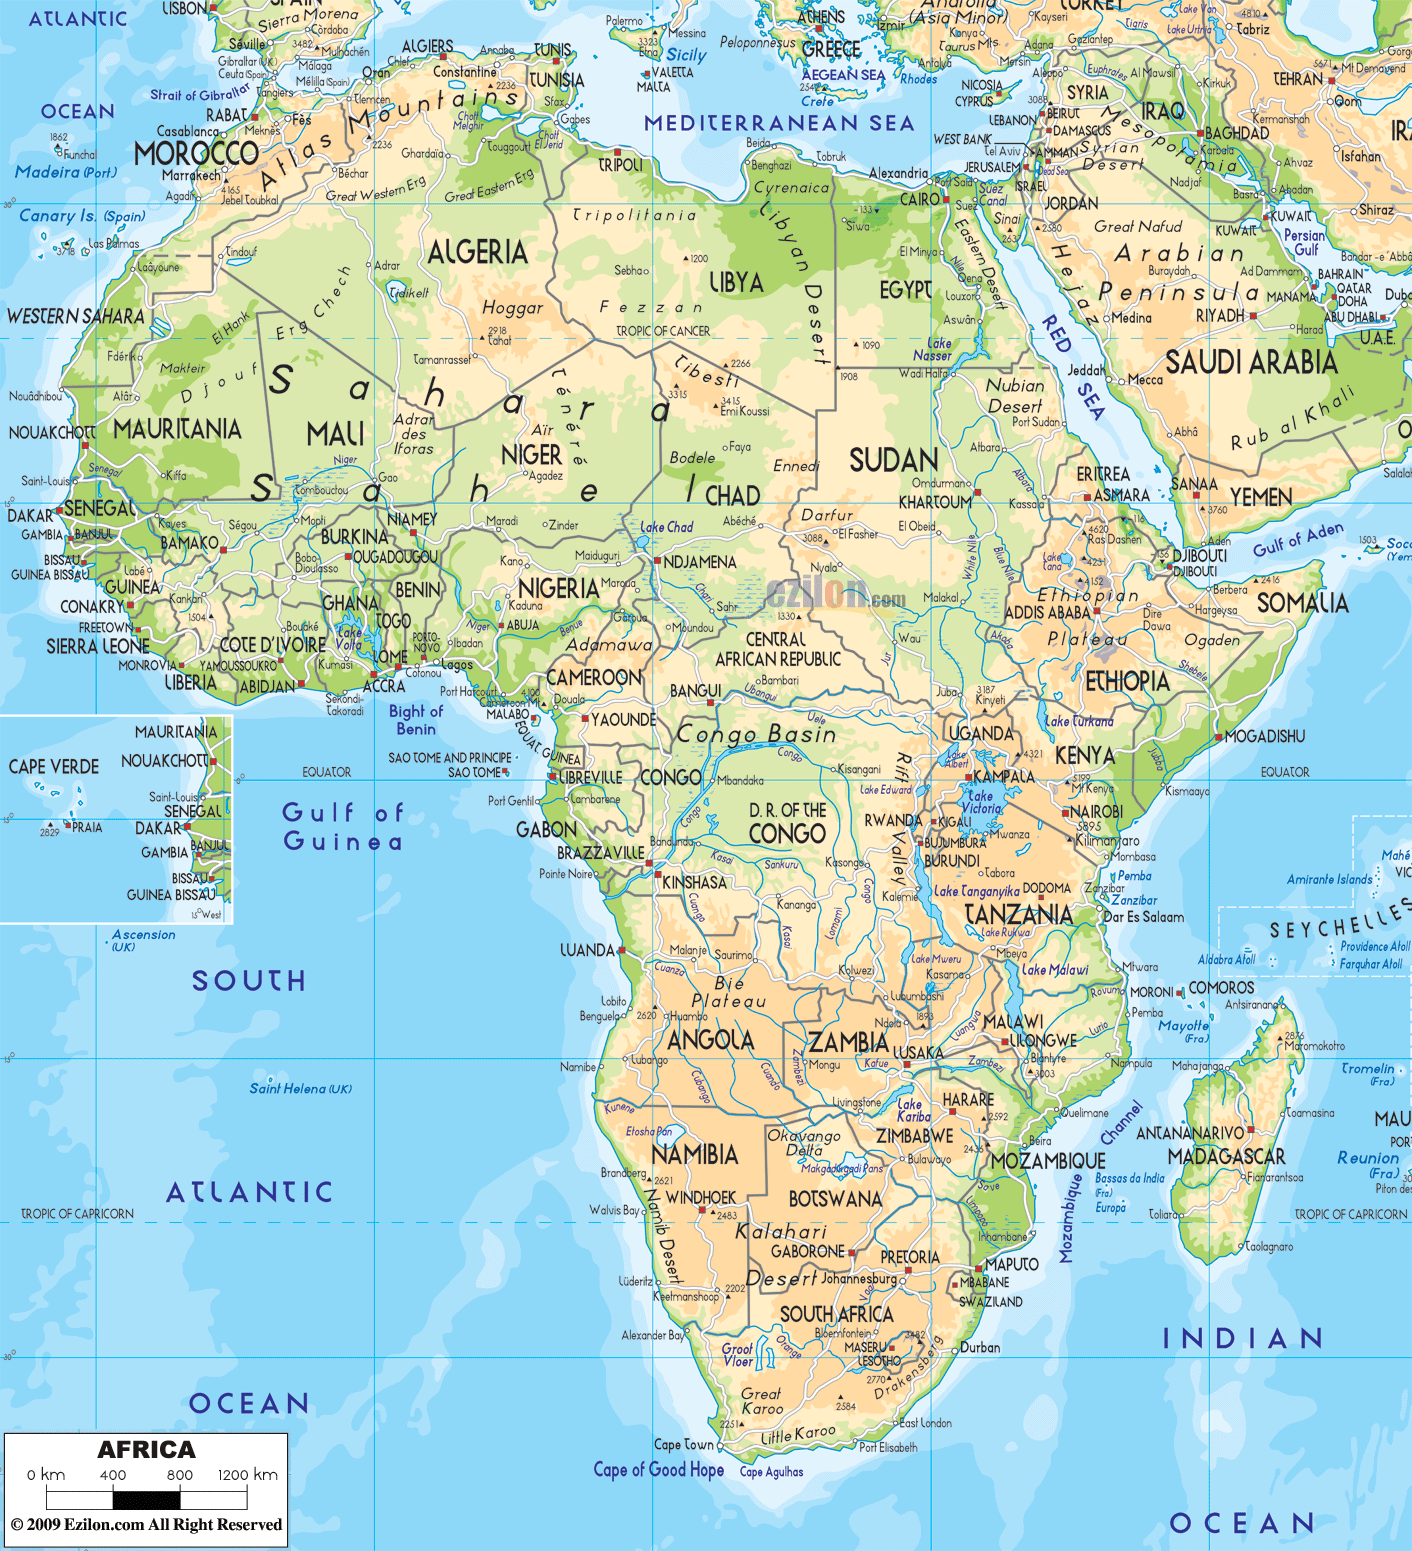 The Physical Map of Africa showing major geographical features like elevations, mountain ranges, deserts, seas, lakes, plateaus, peninsulas, rivers, plains, some regions with vegetations or forest, landforms and other topographic features.